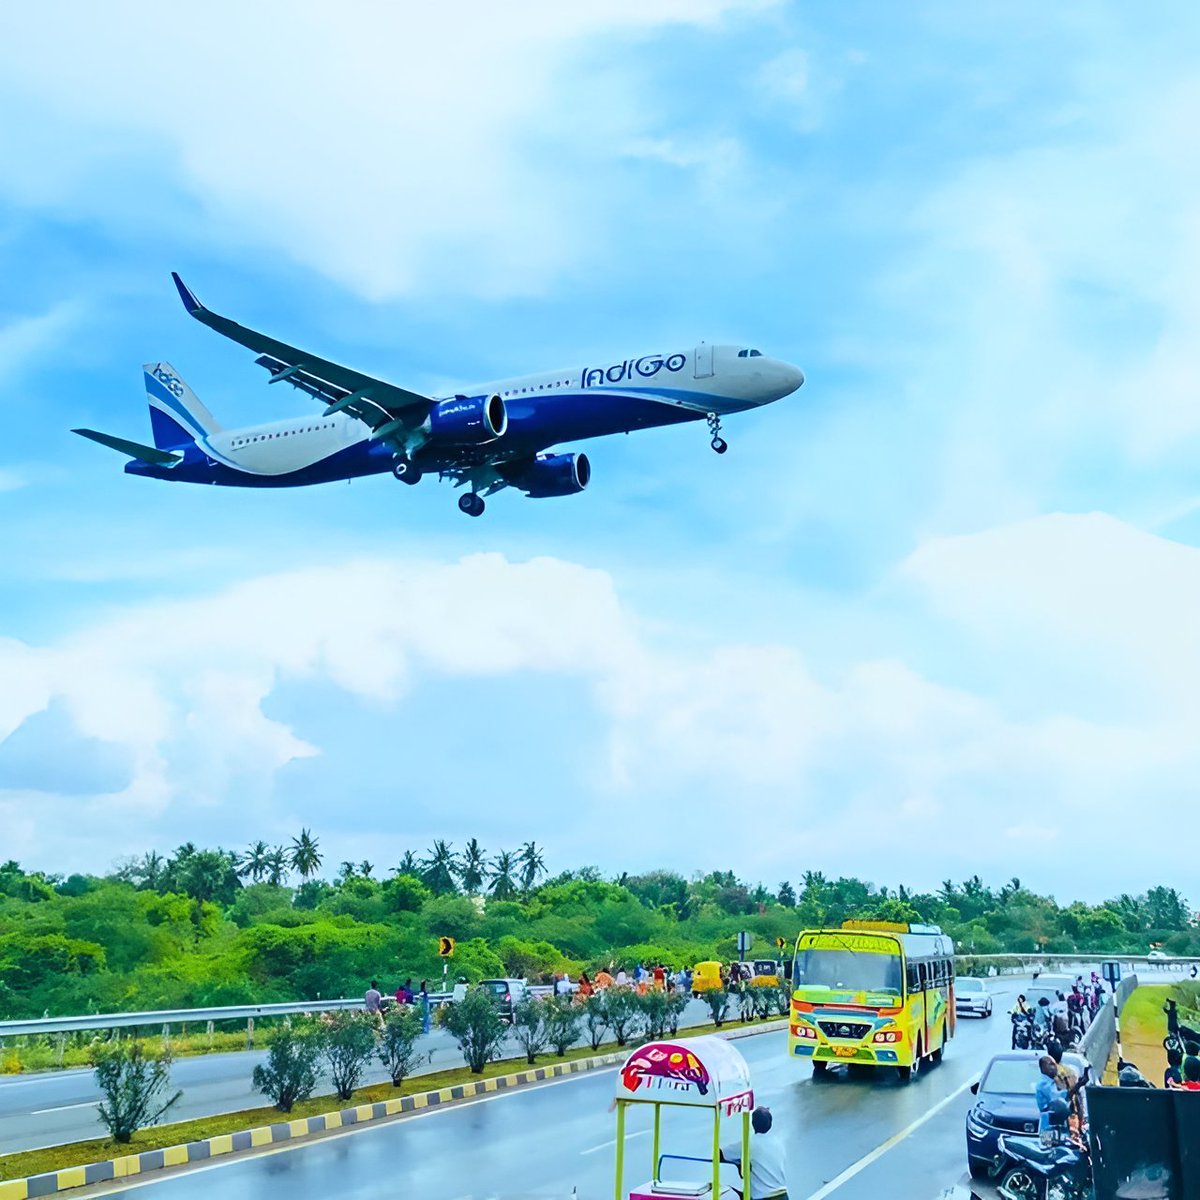 📍Madurai Airport 🫶 #Madurai @IndiGo6E Request to enhance your service from Madurai to Major cities of india and start Int'l destination to KUL, BKK, AUH,... 📸 Credit : Respected Photographer